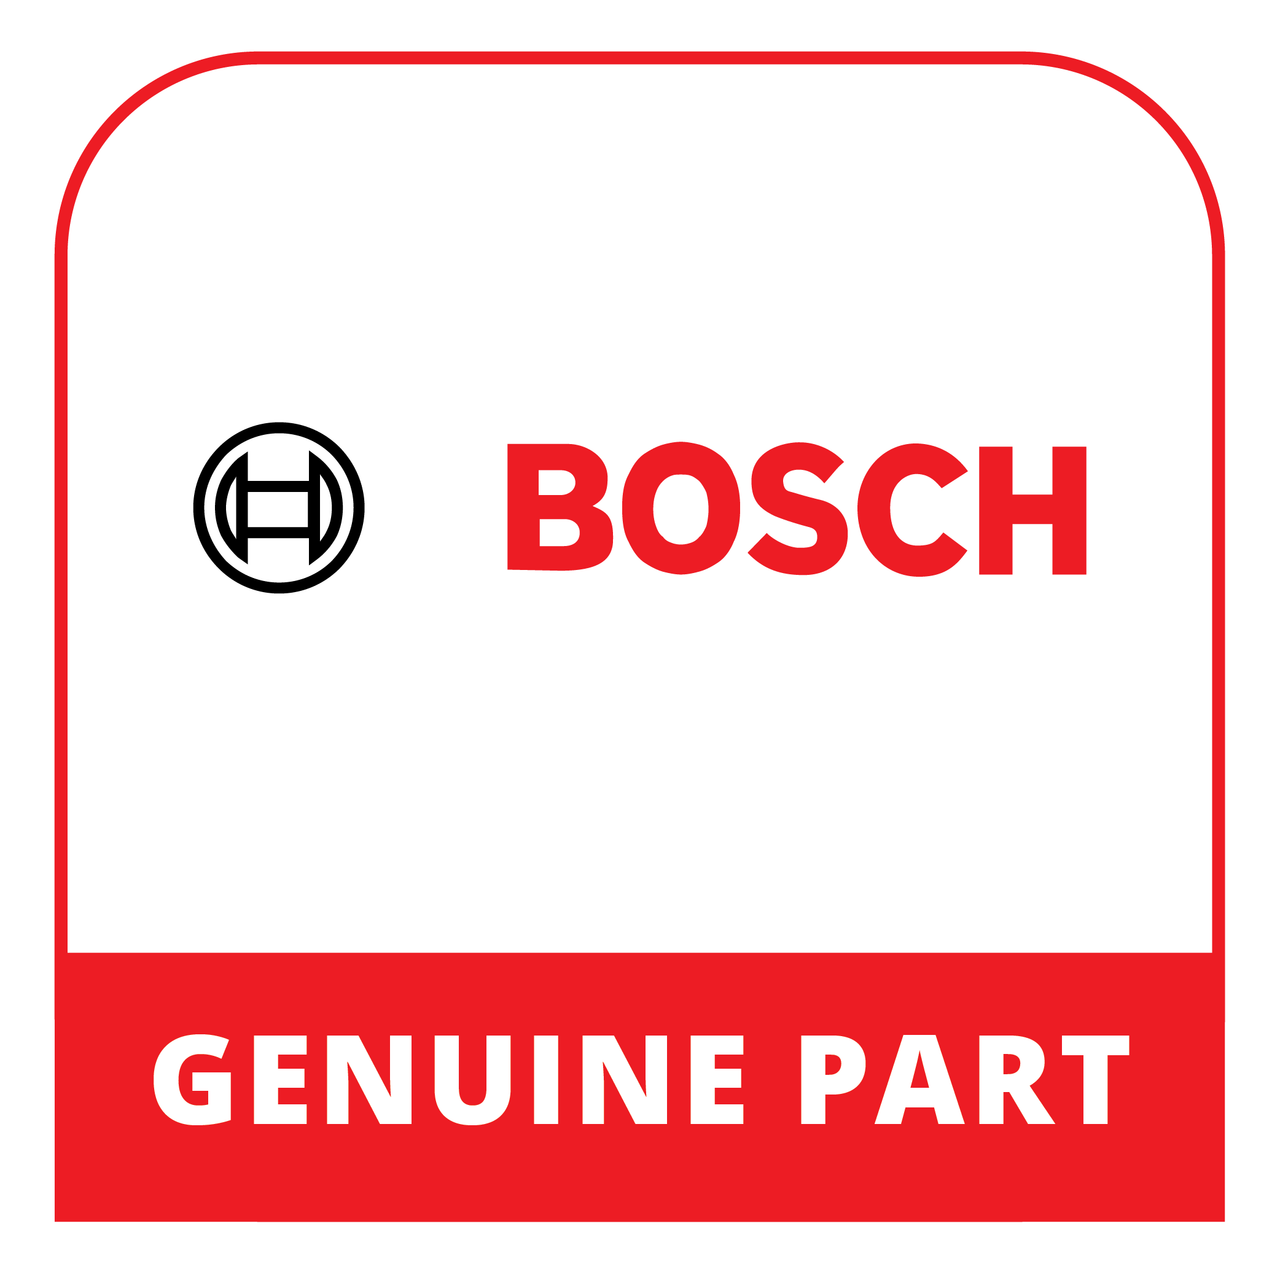 Bosch (Thermador) 12026852 - Control Module Programmed - Genuine Bosch (Thermador) Part